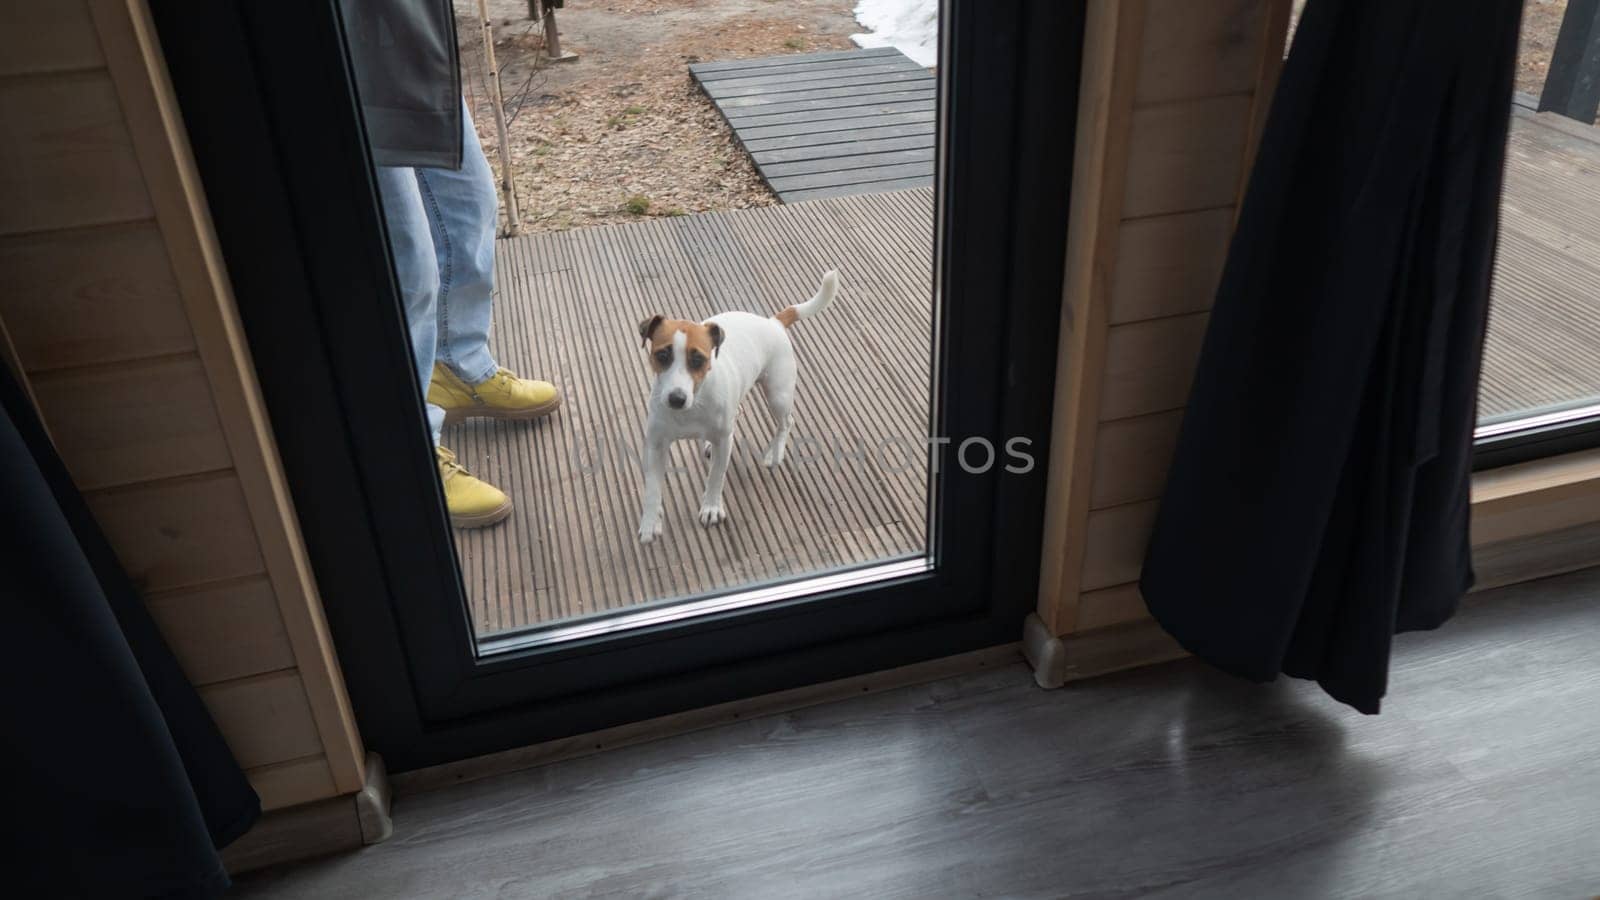 The dog stands at the patio window and asks to go inside the house